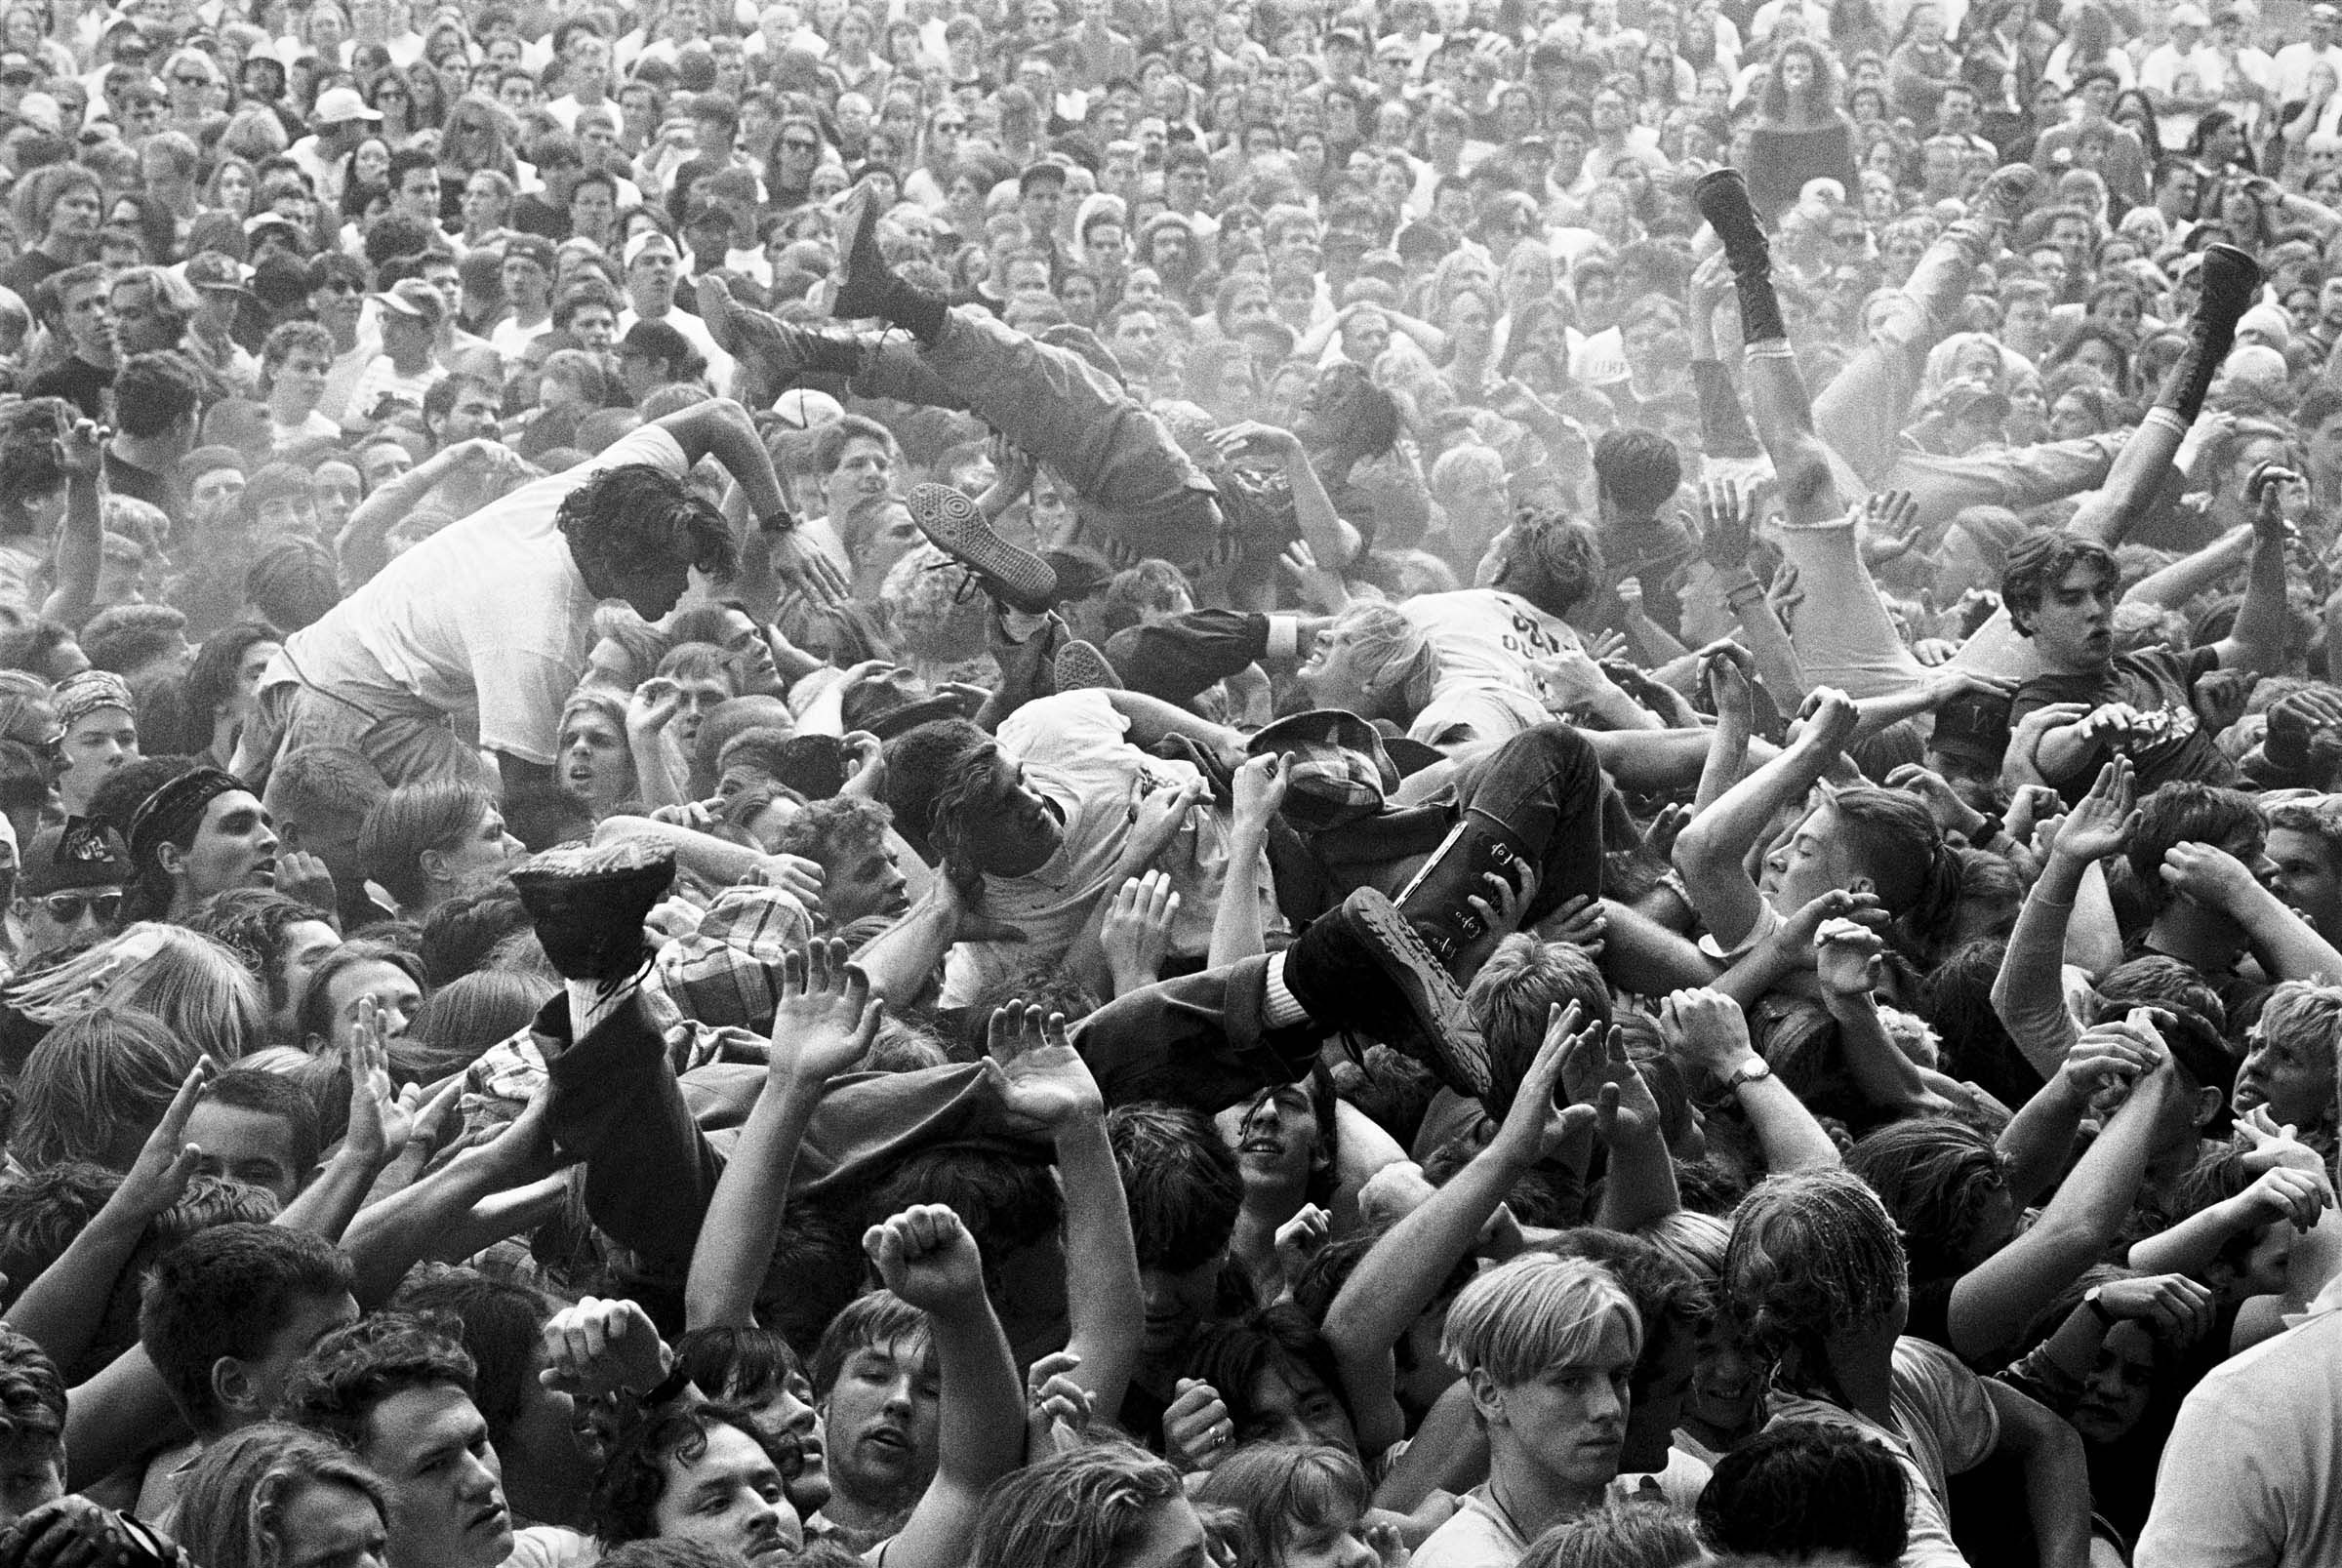 The Paris Review the Mosh Pit, Who Gets to Have Fun, and at Whose Expense?